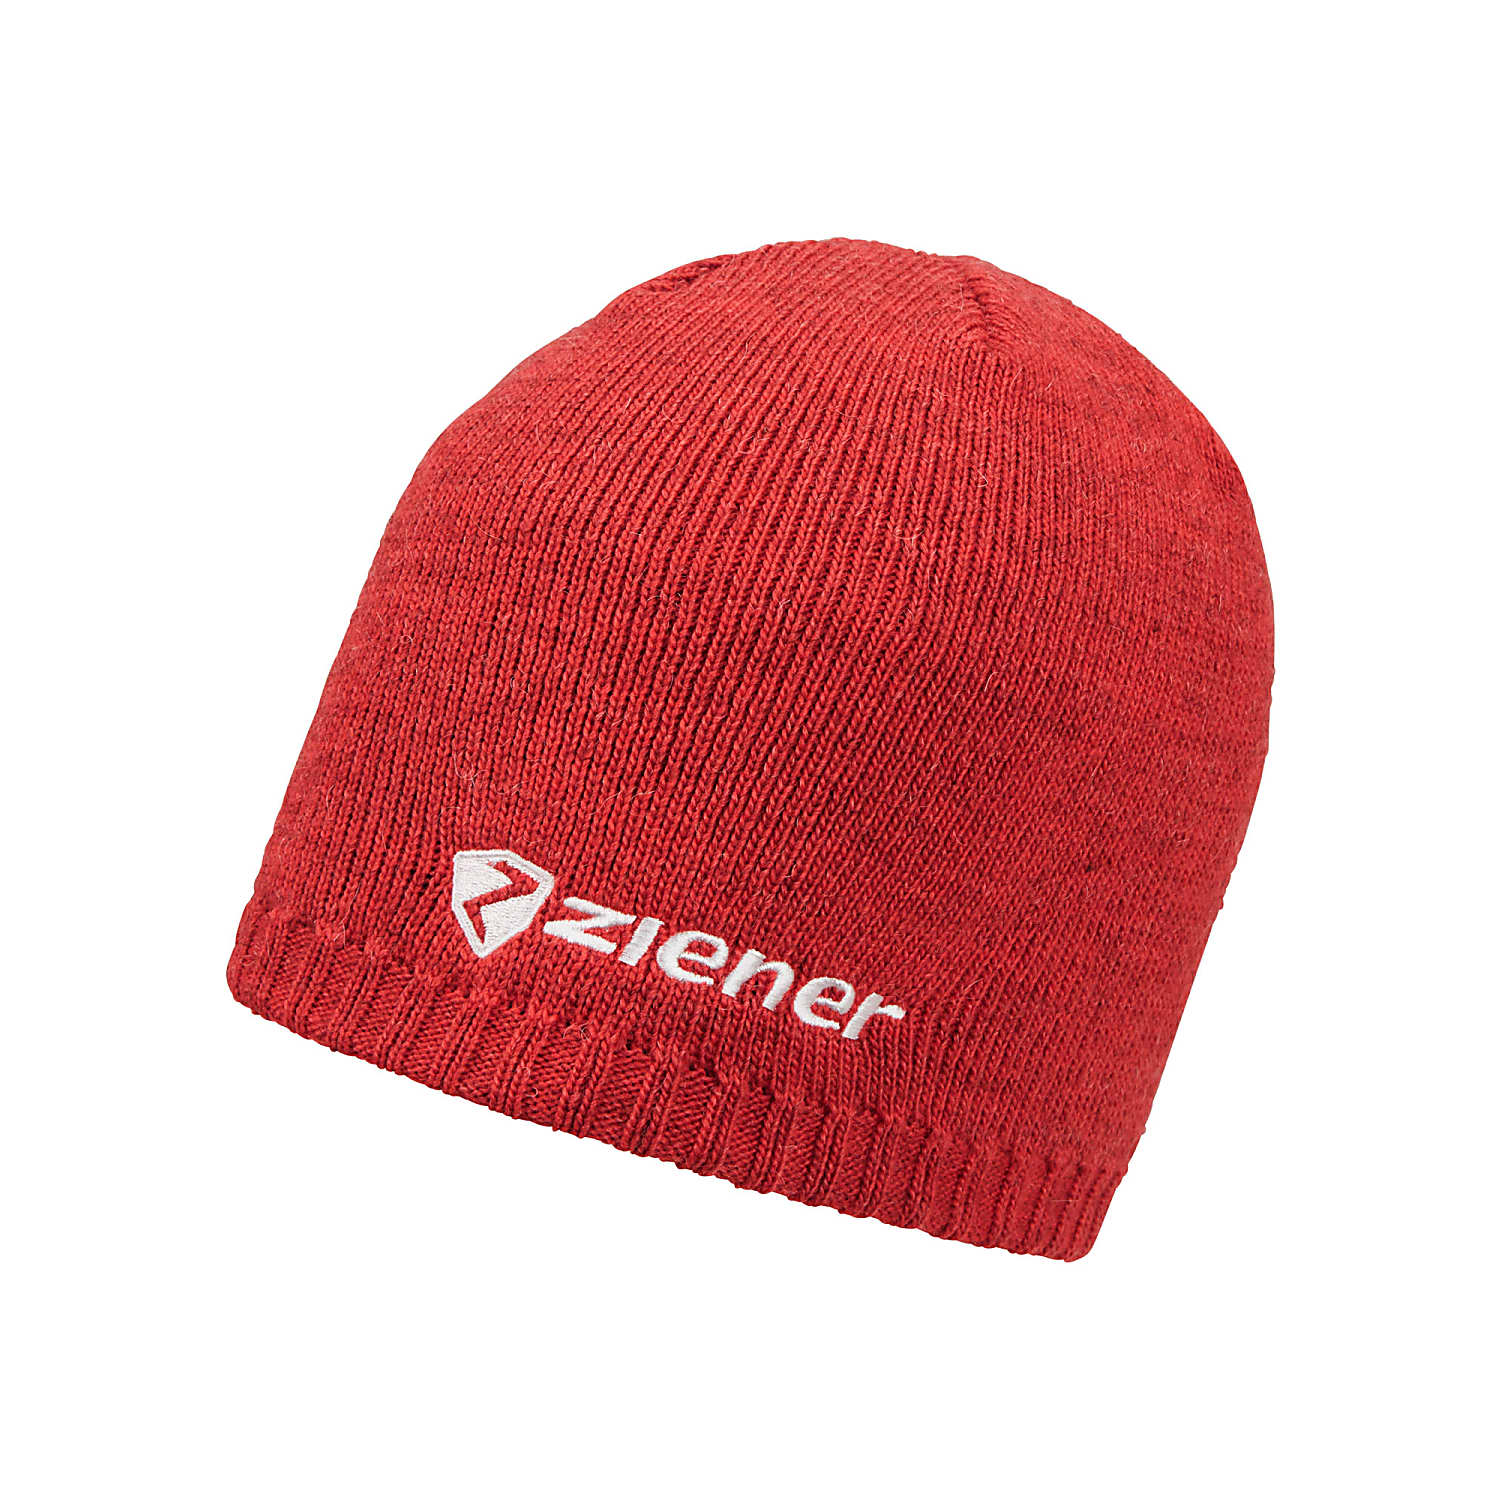 Ziener IRUNO HAT, Red - Fast and cheap shipping